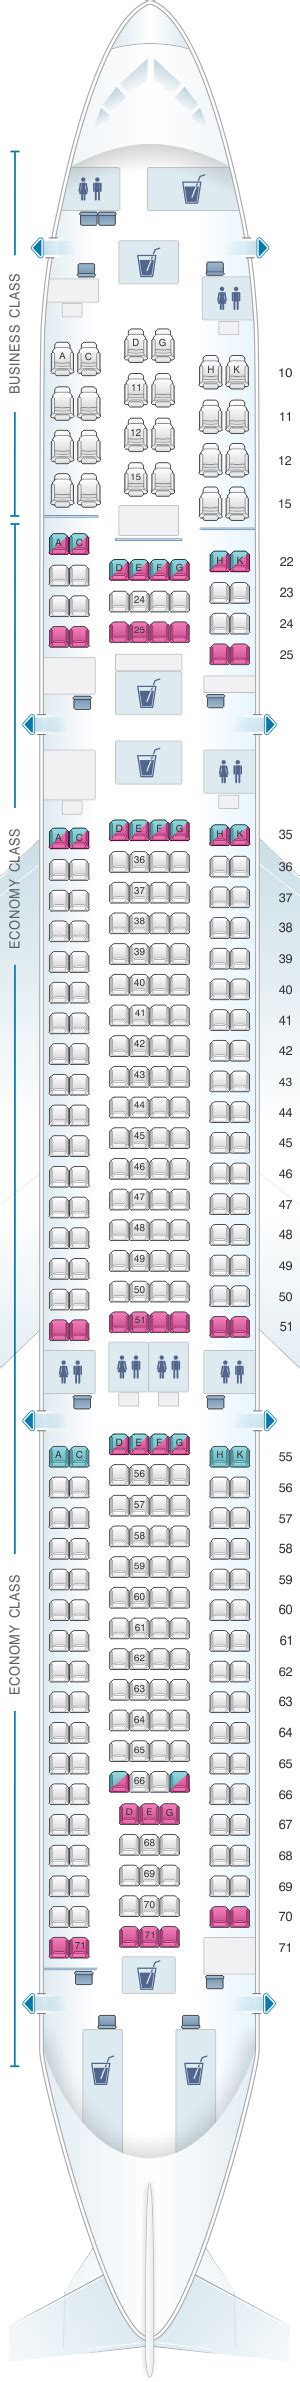 Seat Map Cathay Dragon Airbus A330 300 A33h